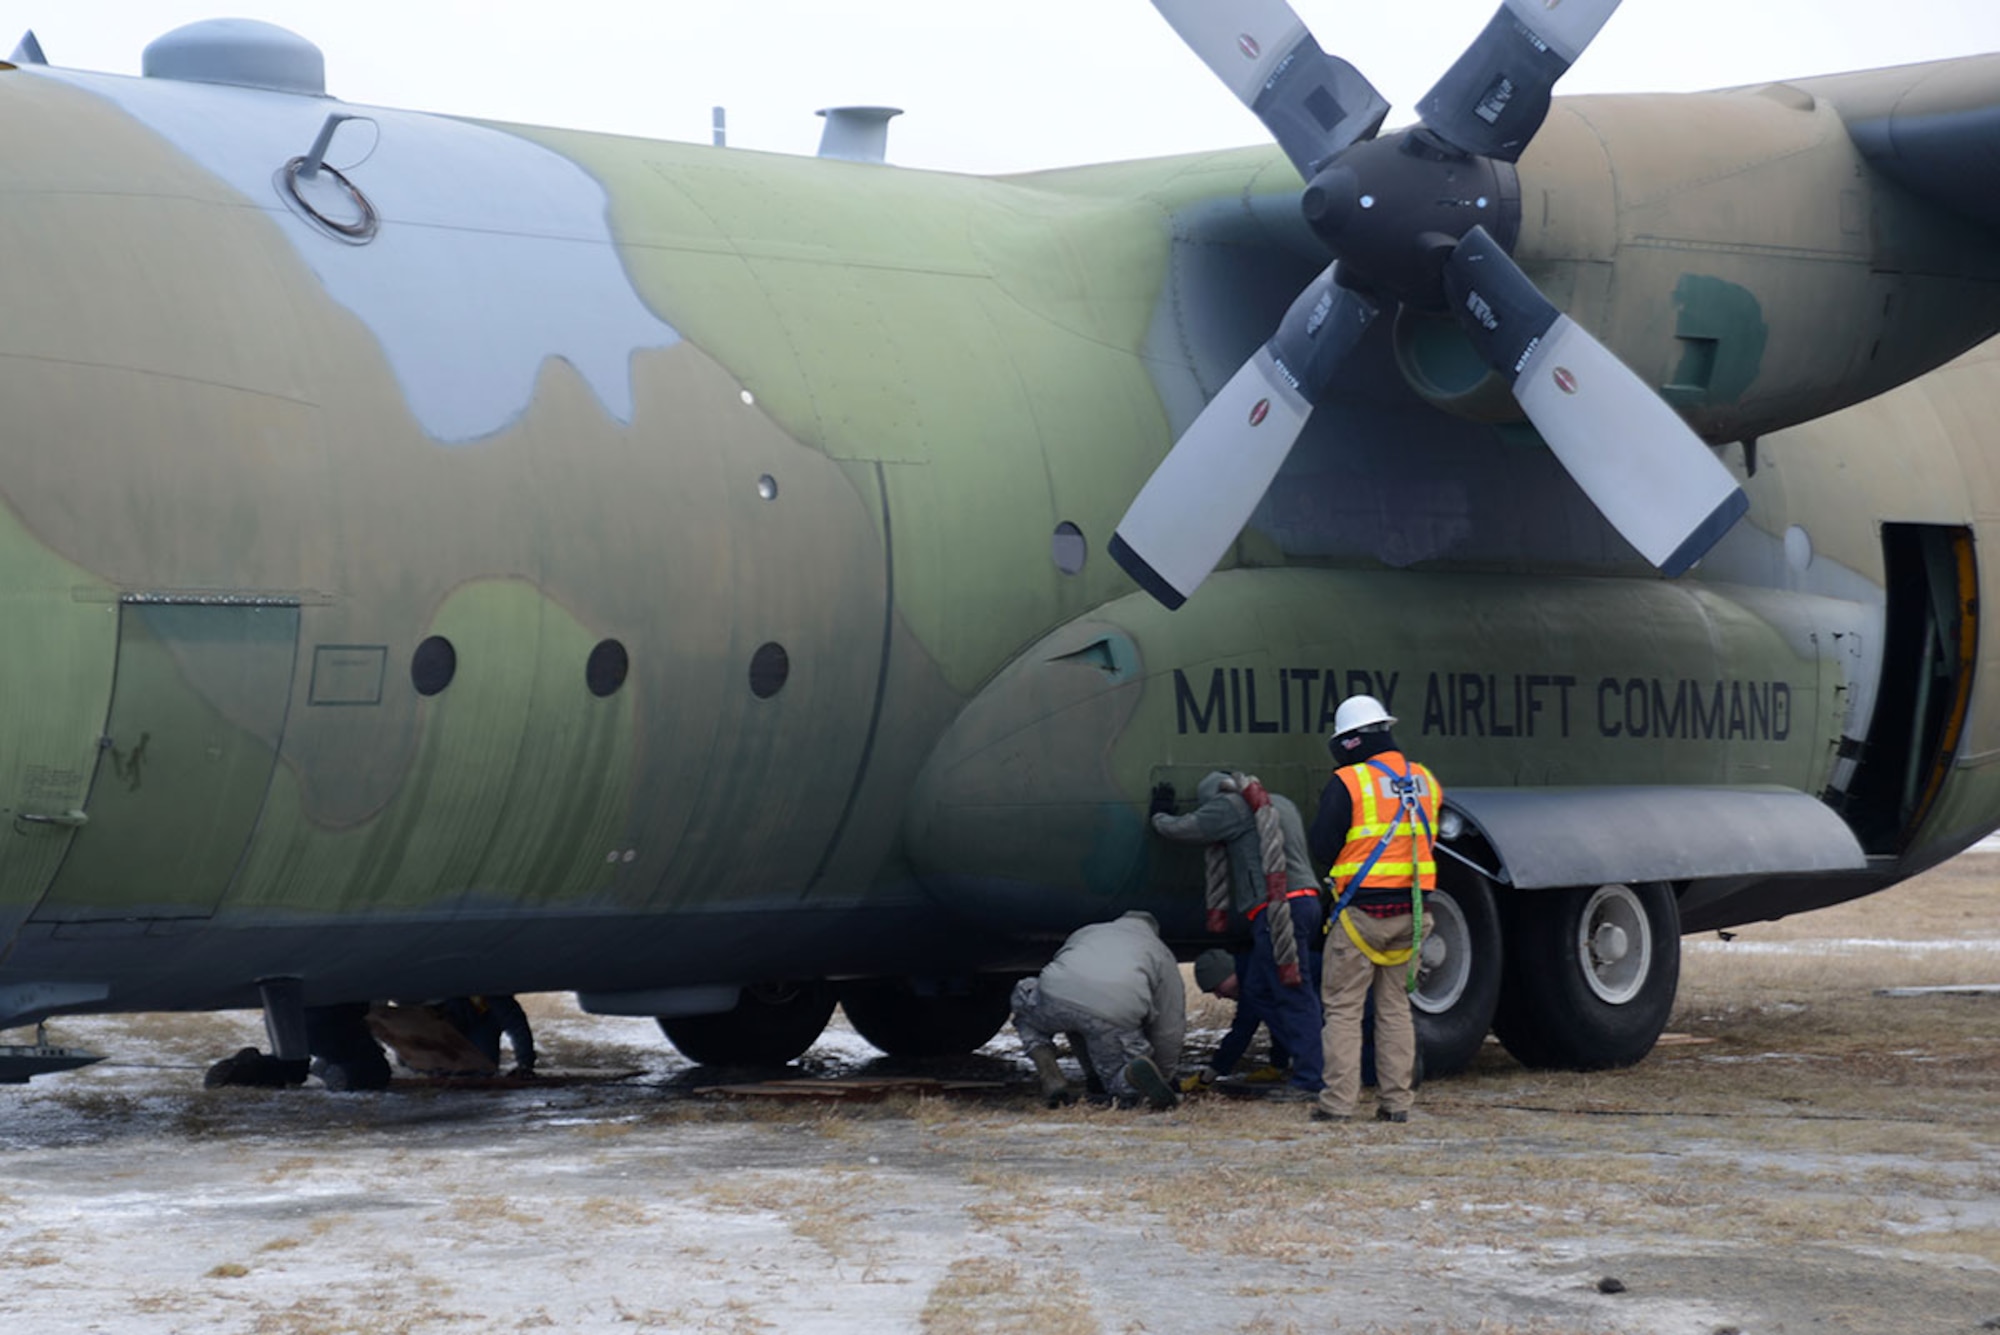 Airmen and contracted personnel work together to tow the static C-130 Hercules at Joint Base Elmendorf-Richardson Feb. 27, 2016. Dirt and wooden planks were laid down in front of the aircraft’s wheels to prevent getting stuck as it is relocated to Hangar 21 for refurbishment. (U.S. Air Force photo by Airman 1st Class Christopher R. Morales)